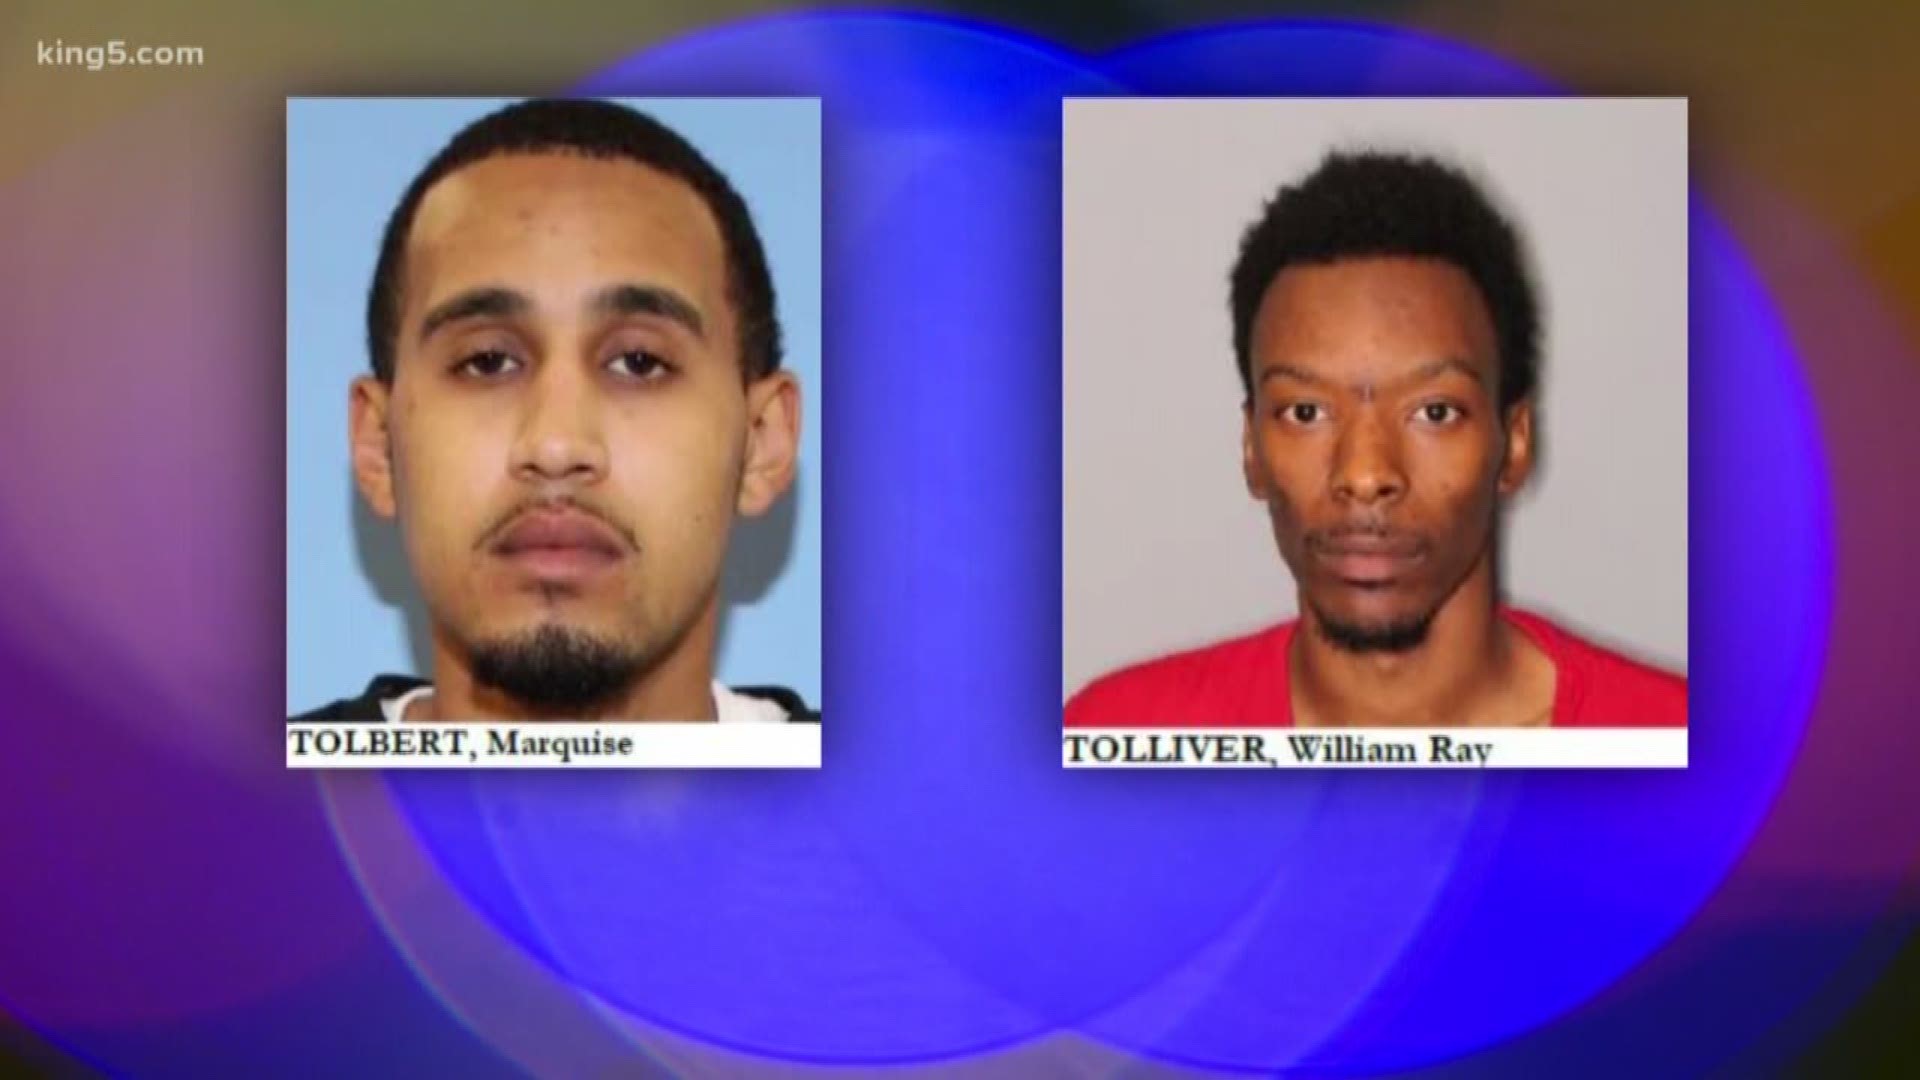 Marquise Tolbert and William Tolliver were arrested in Las Vegas this weekend in connection with the deadly shooting in downtown Seattle.